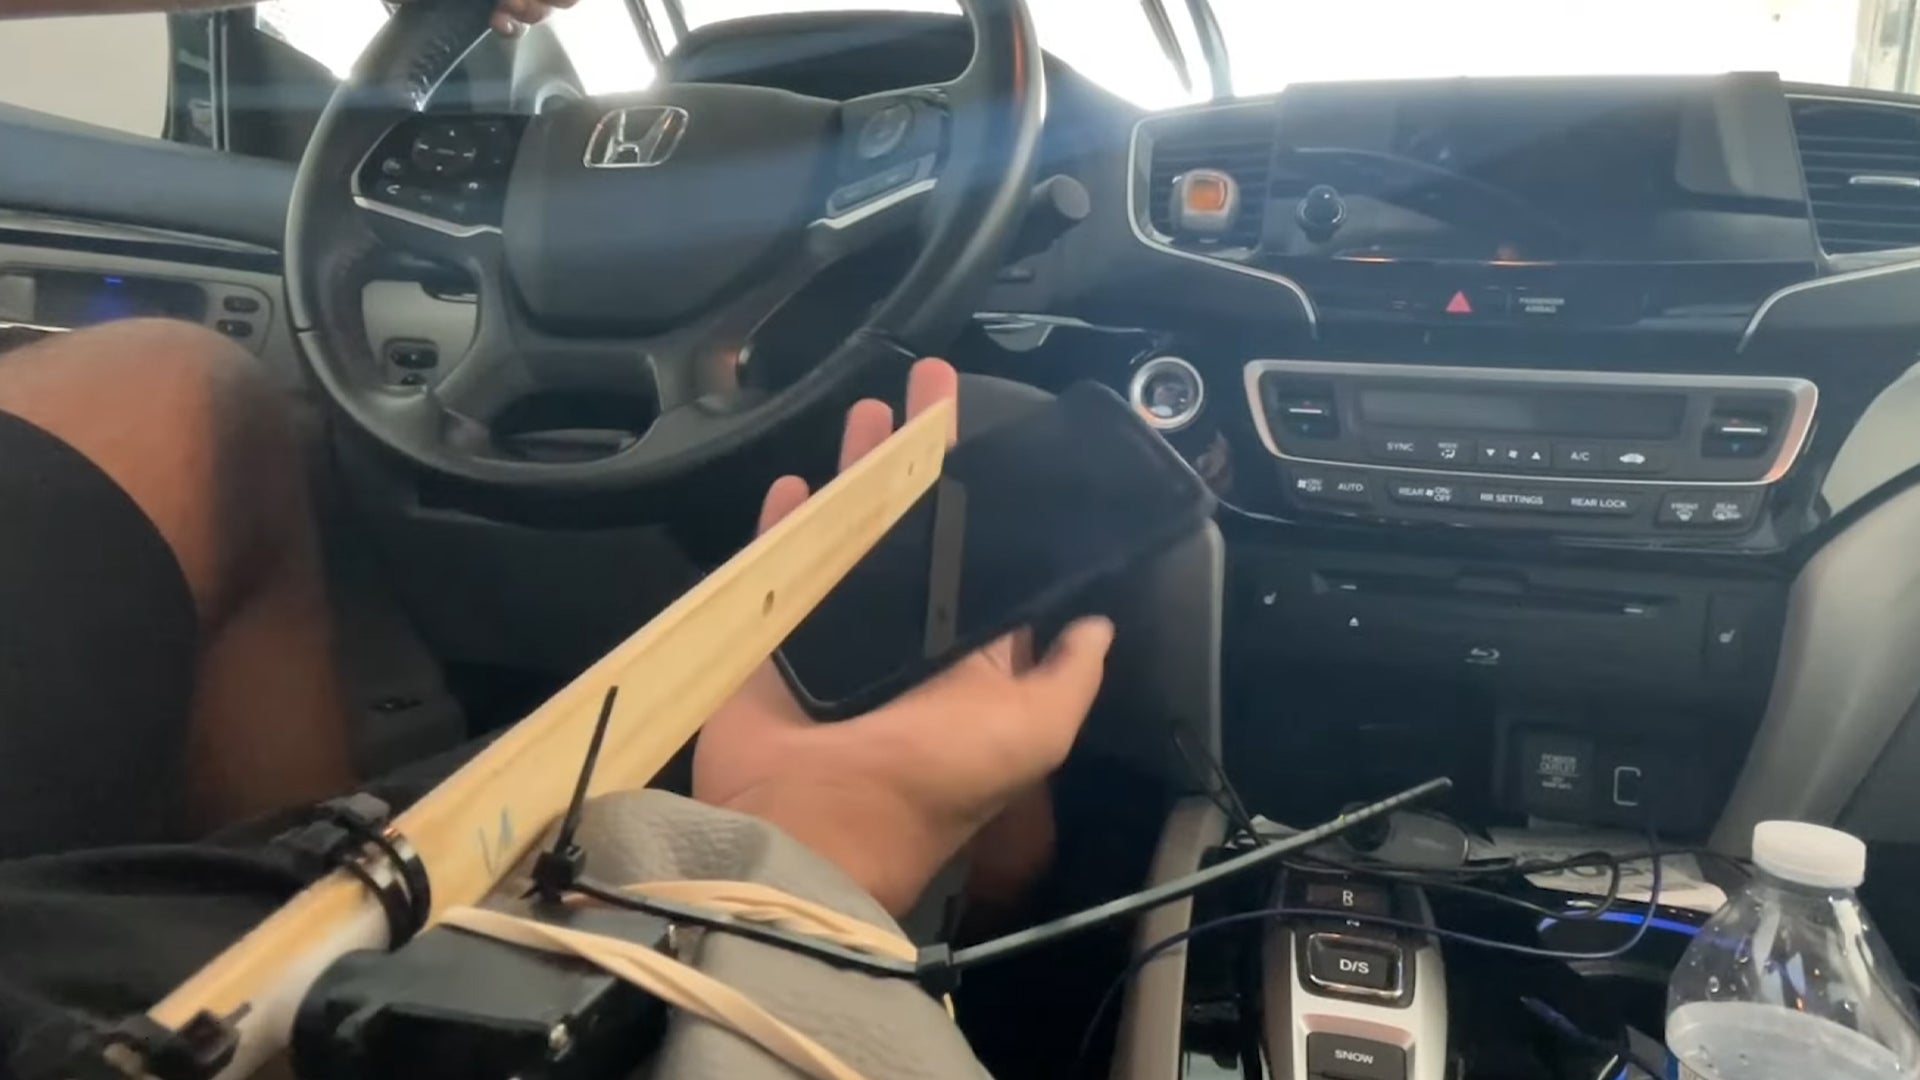 A Phone-Slapping Robot Is One Way to Combat Distracted Driving